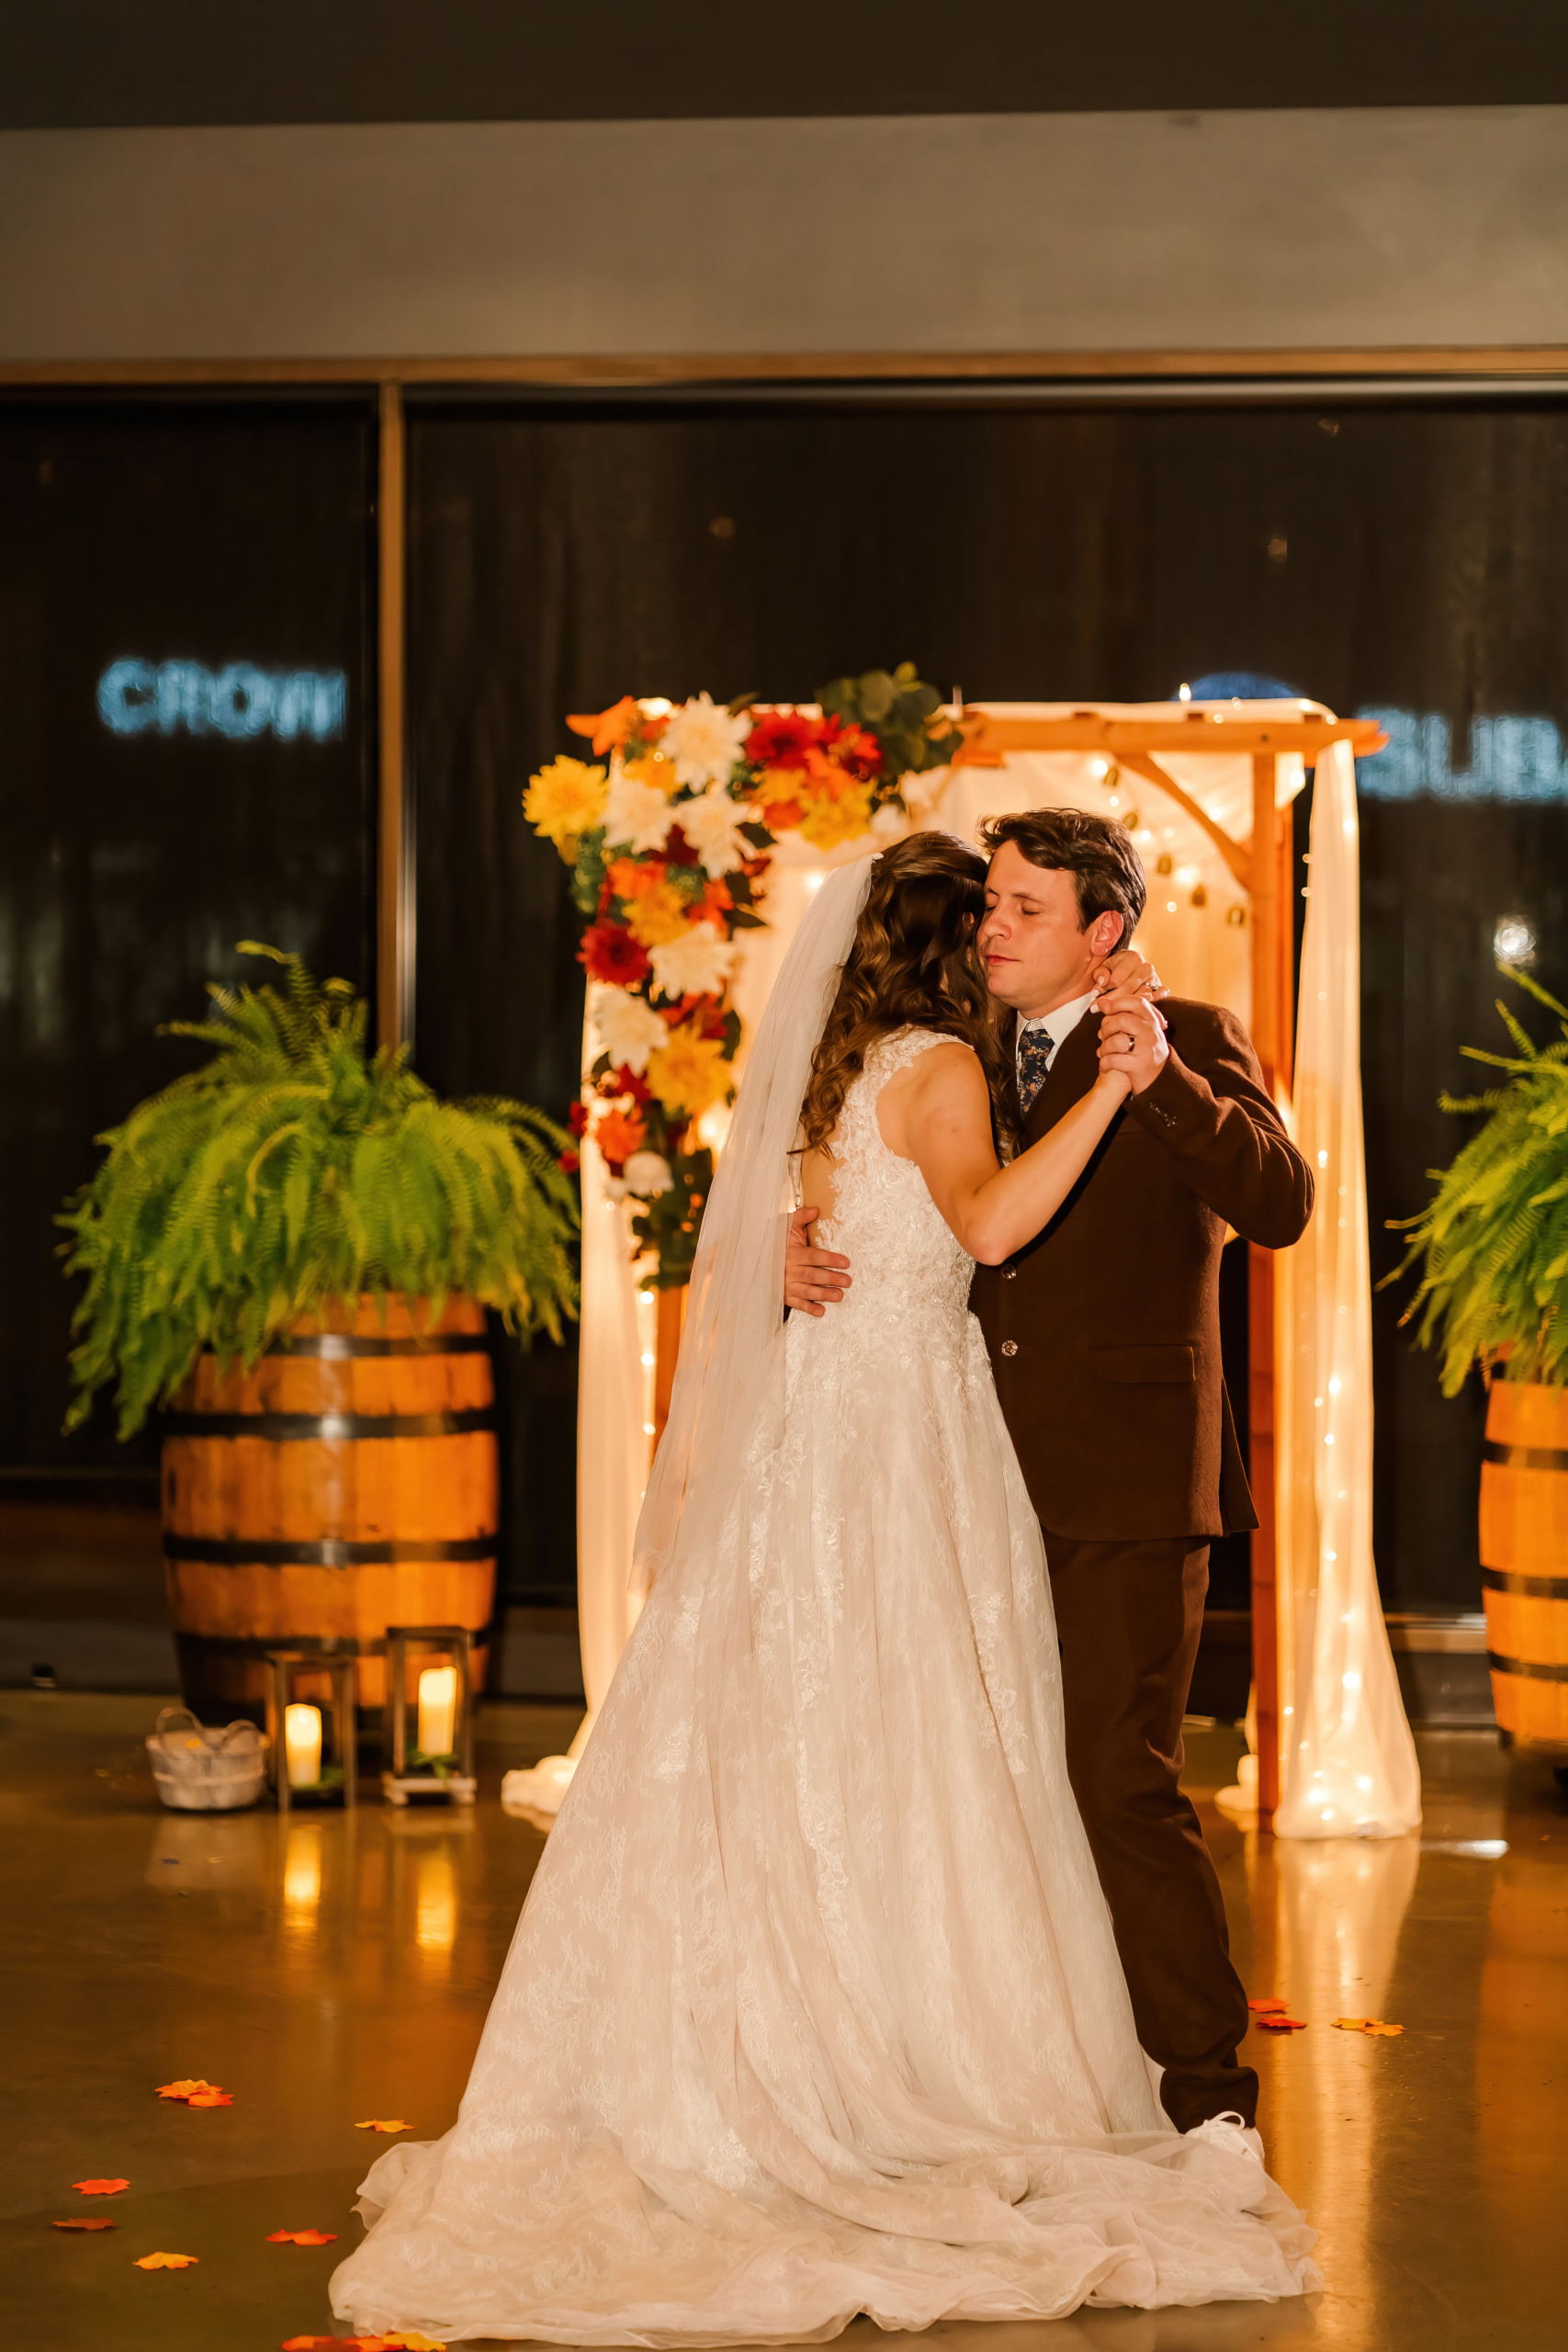 Chattanooga Whiskey Event Hall First Dance